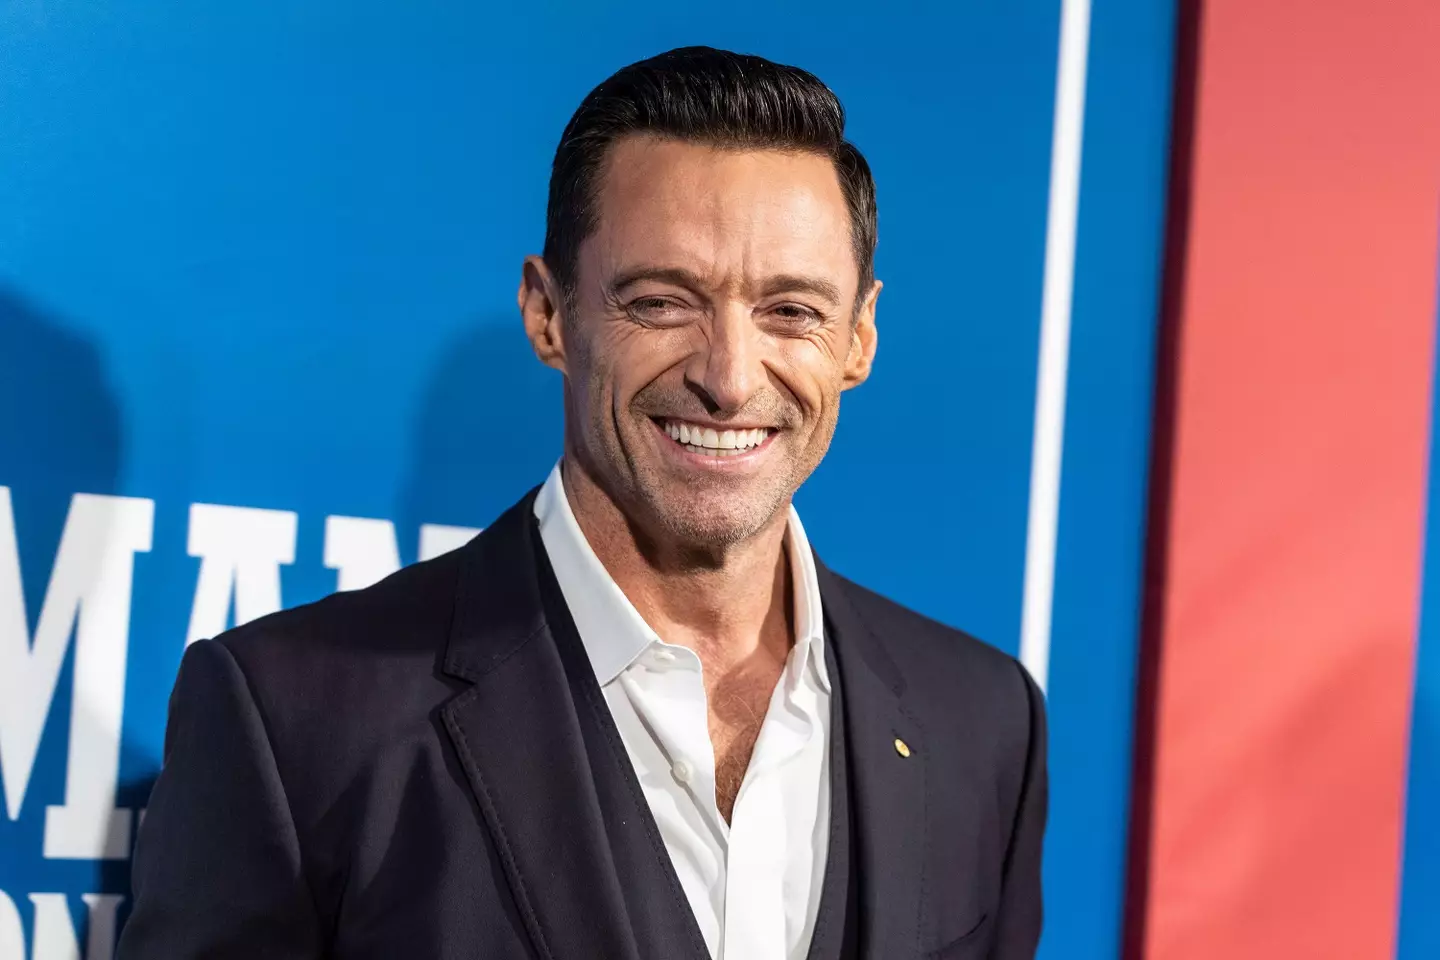 Hugh Jackman at the opening night of The Music Man.